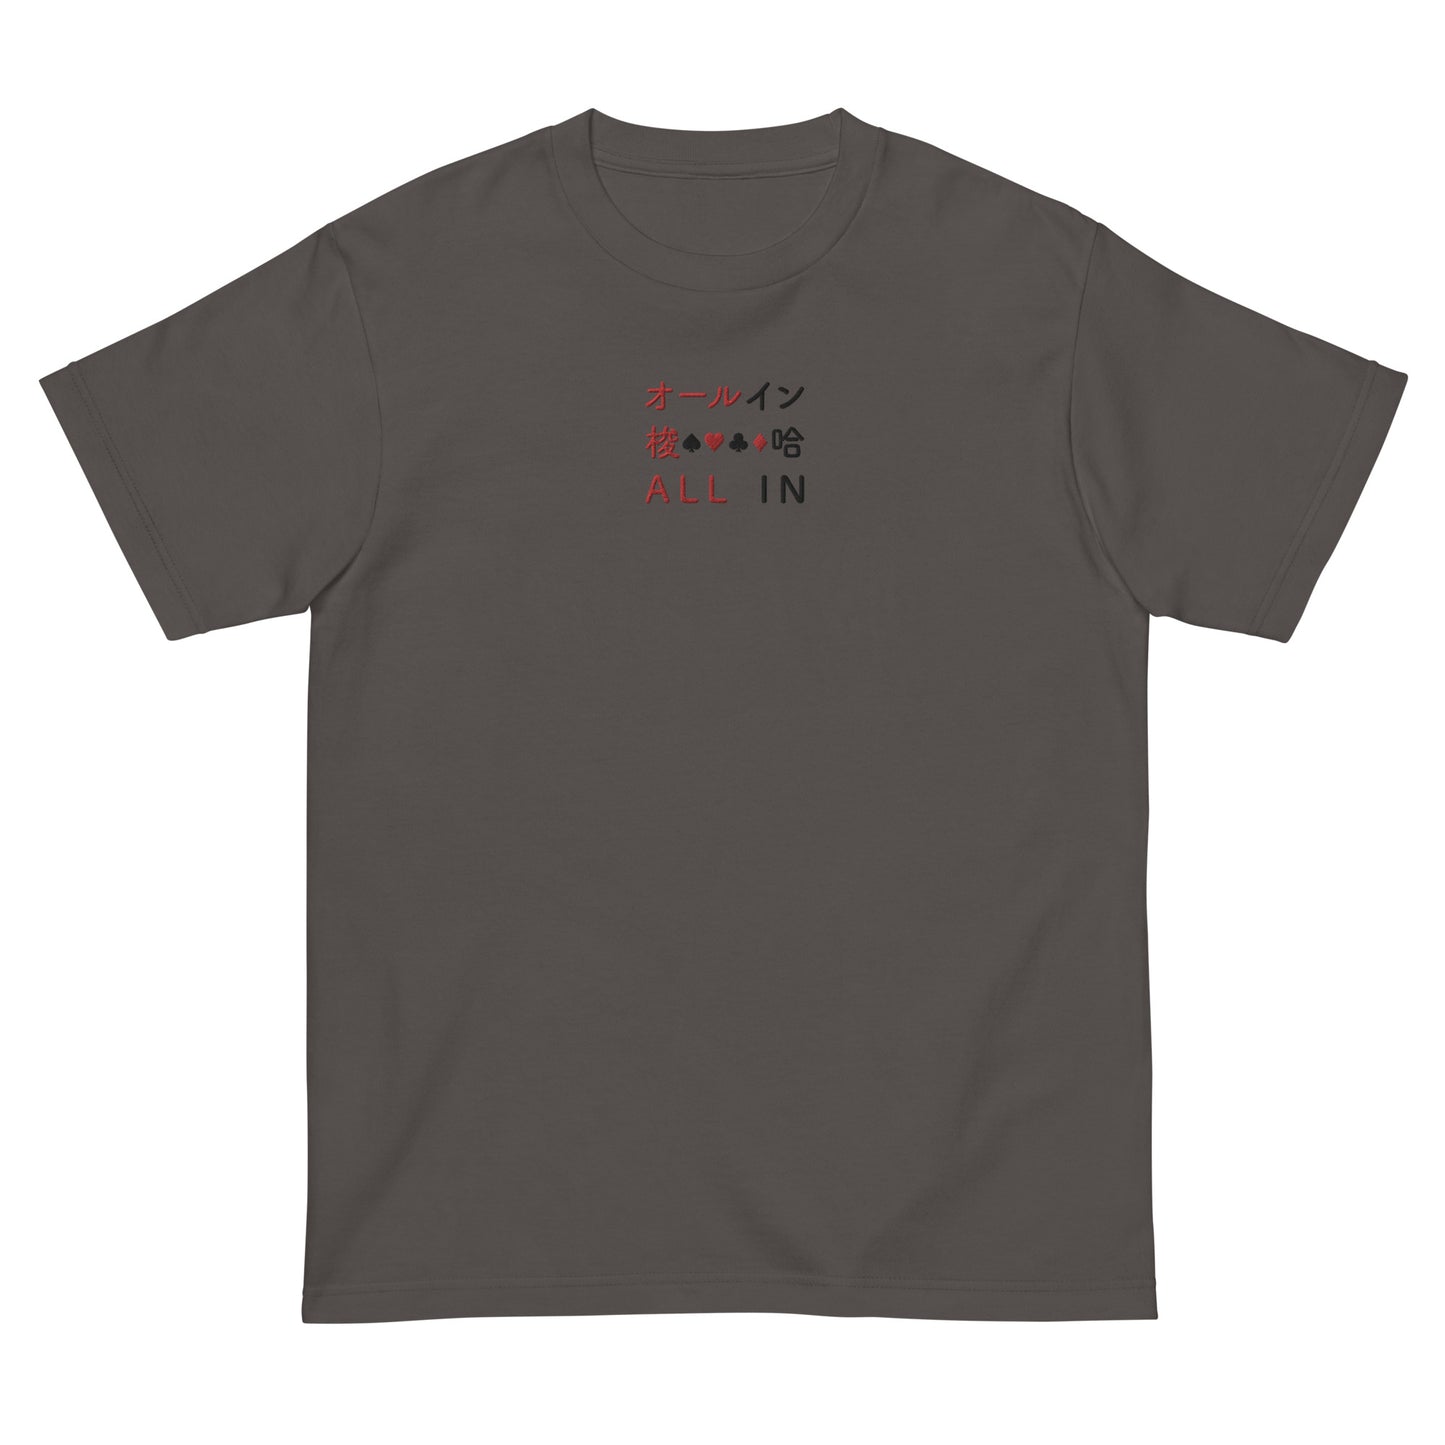 Dark Gray High Quality Tee - Front Design with an Red, Black Embroidery "All IN" in Japanese,Chinese and English